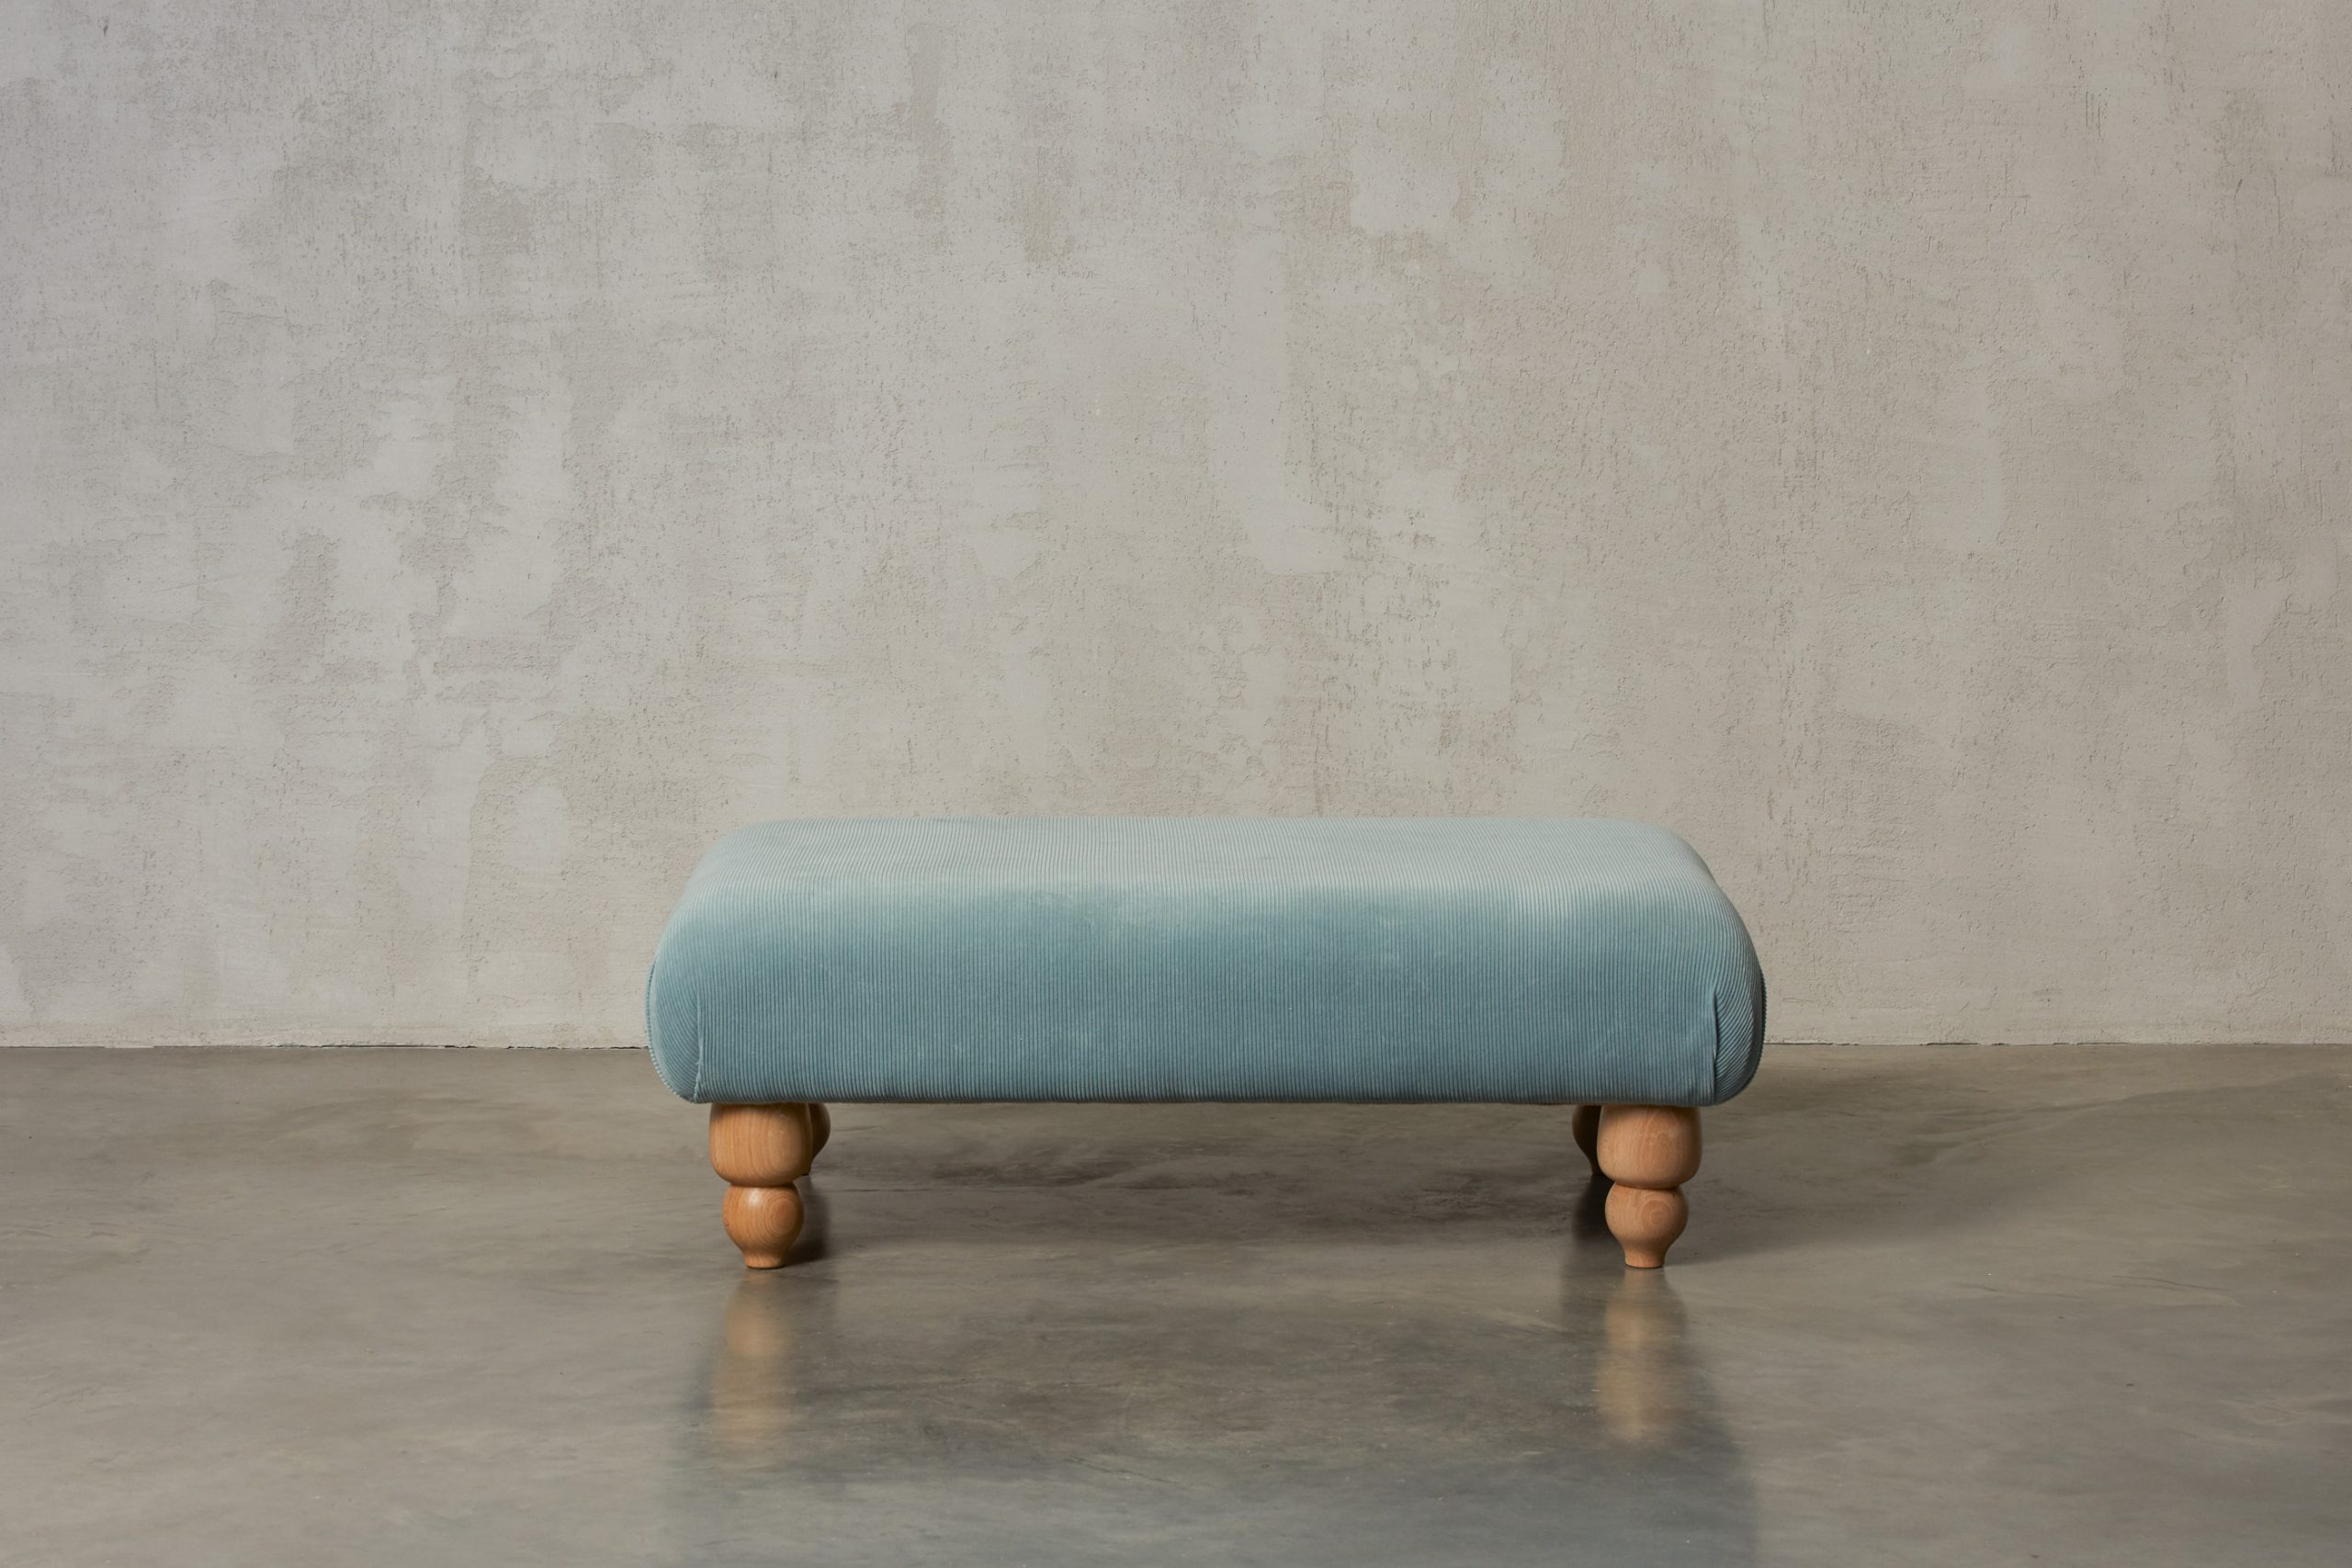 Foot stool made by UP Sofa Makers